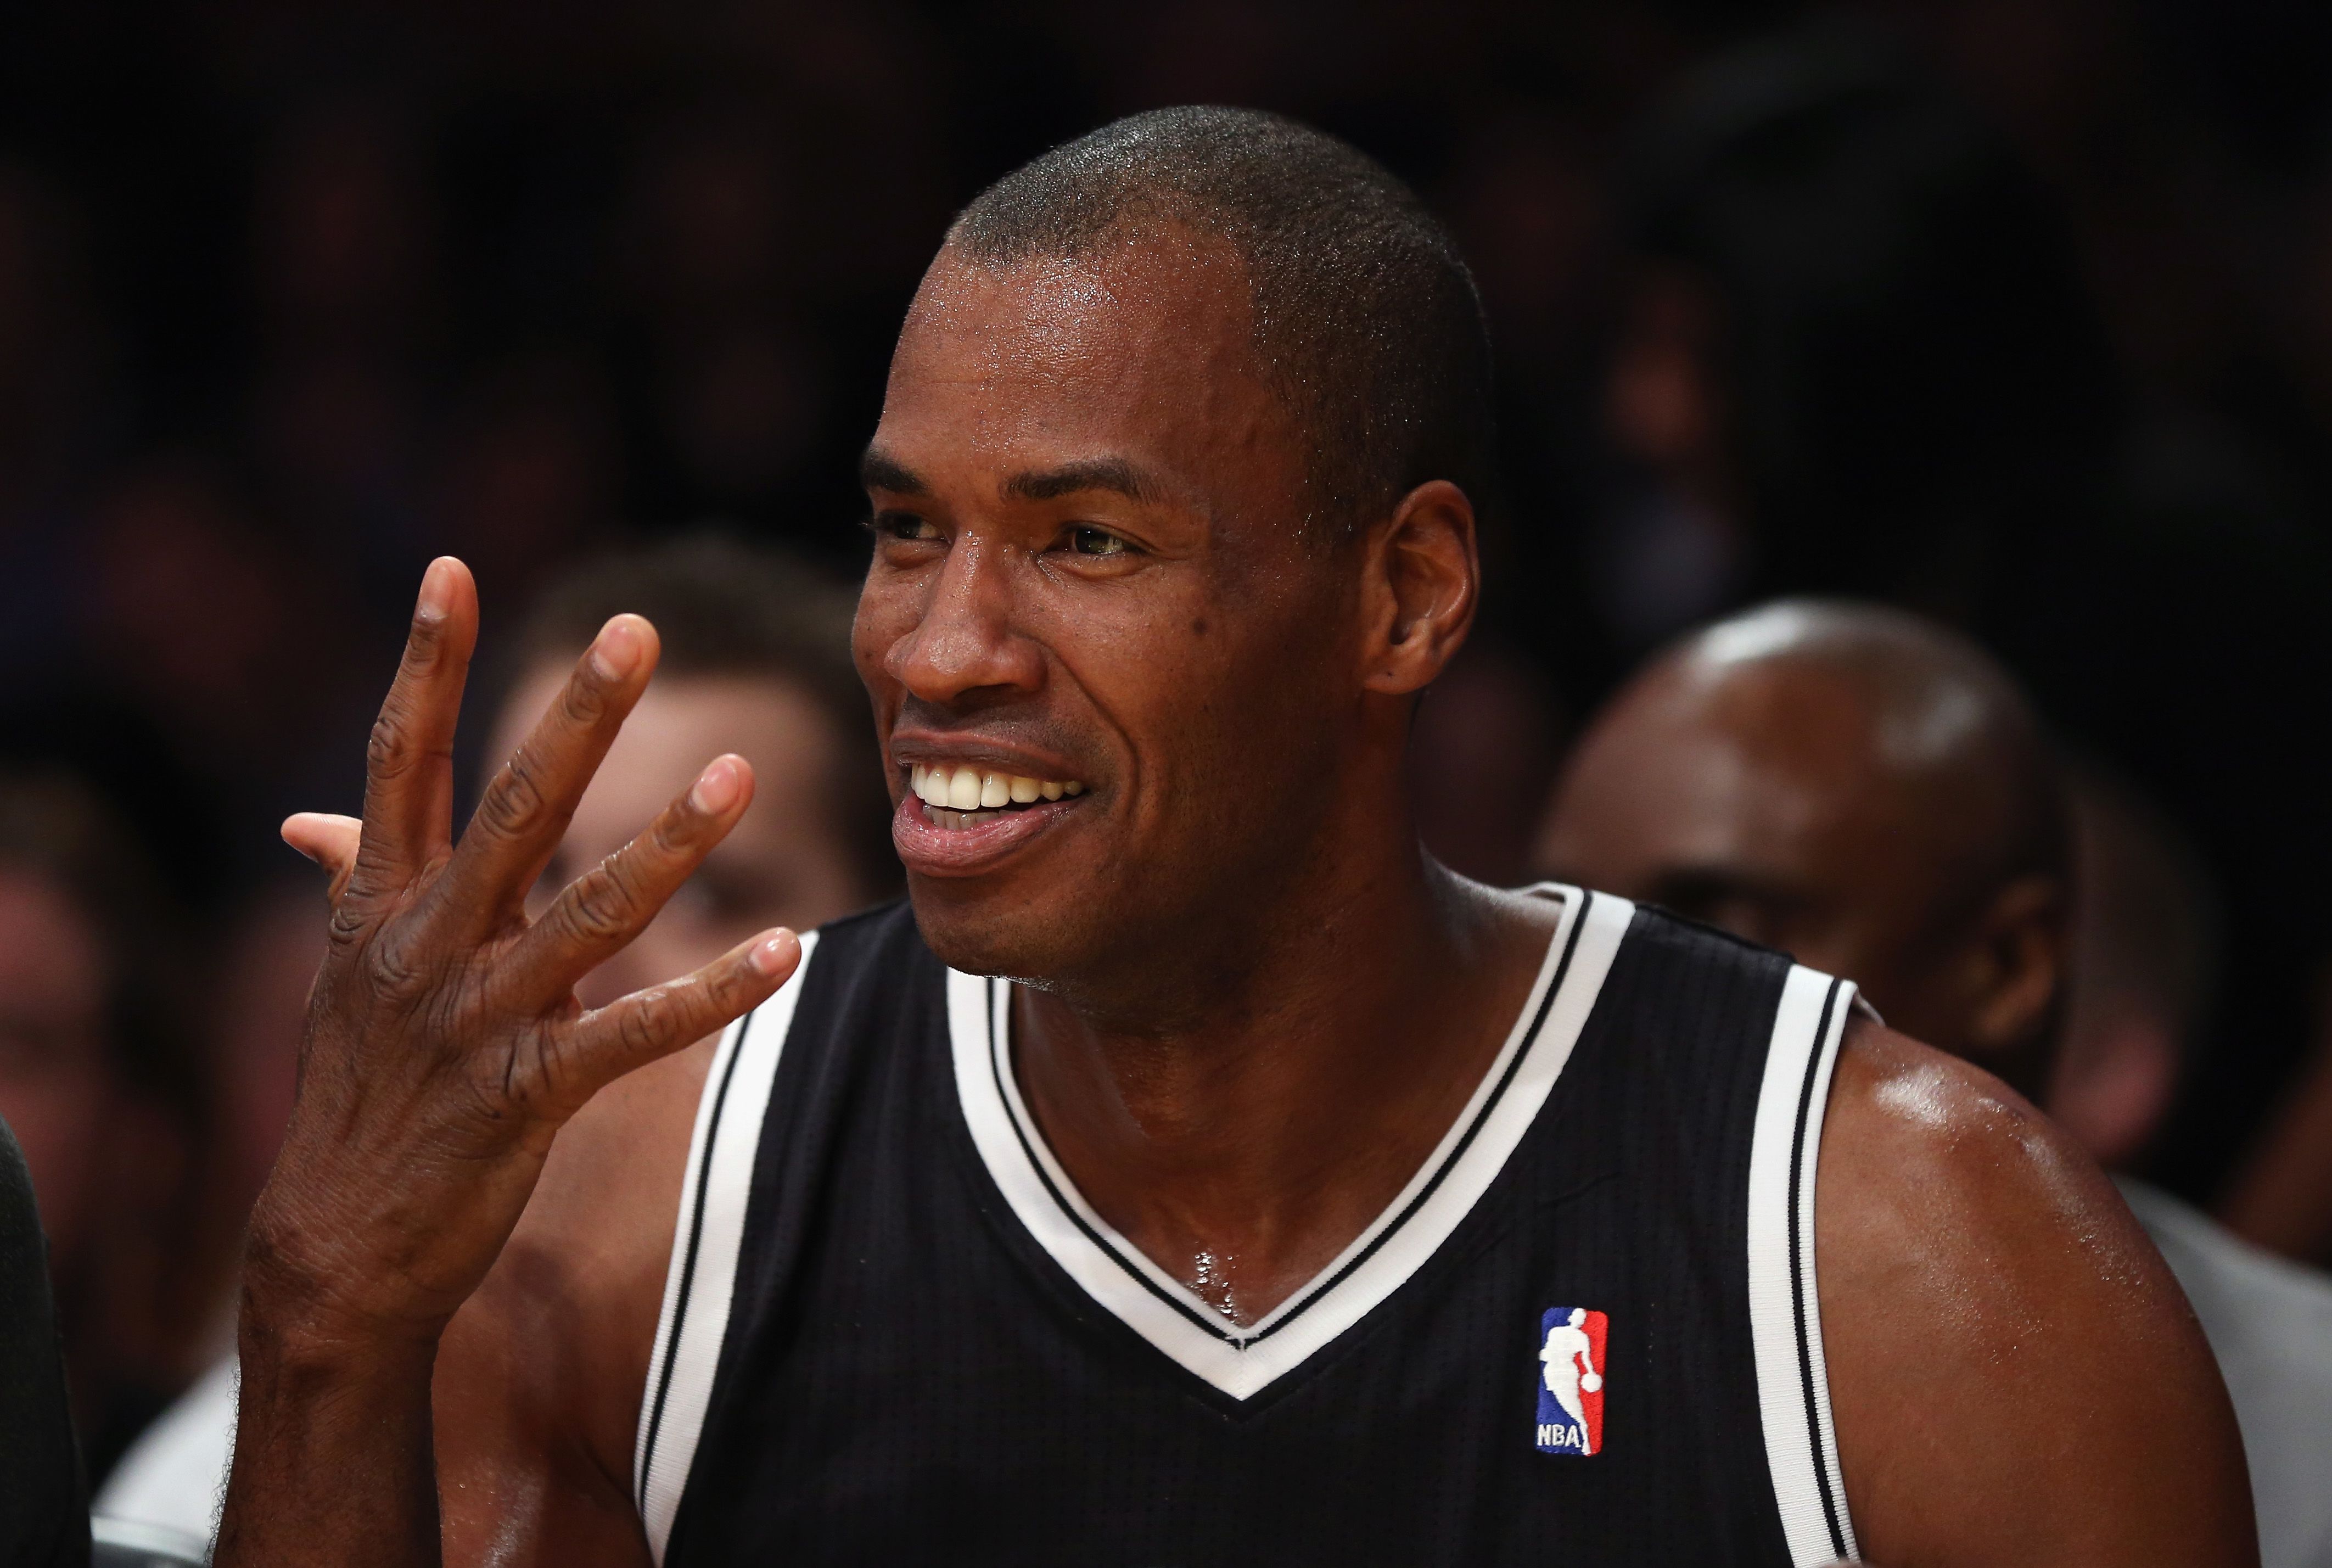 Jason Collins jerseys, four-pointers and other NBA conspiracies, NBA